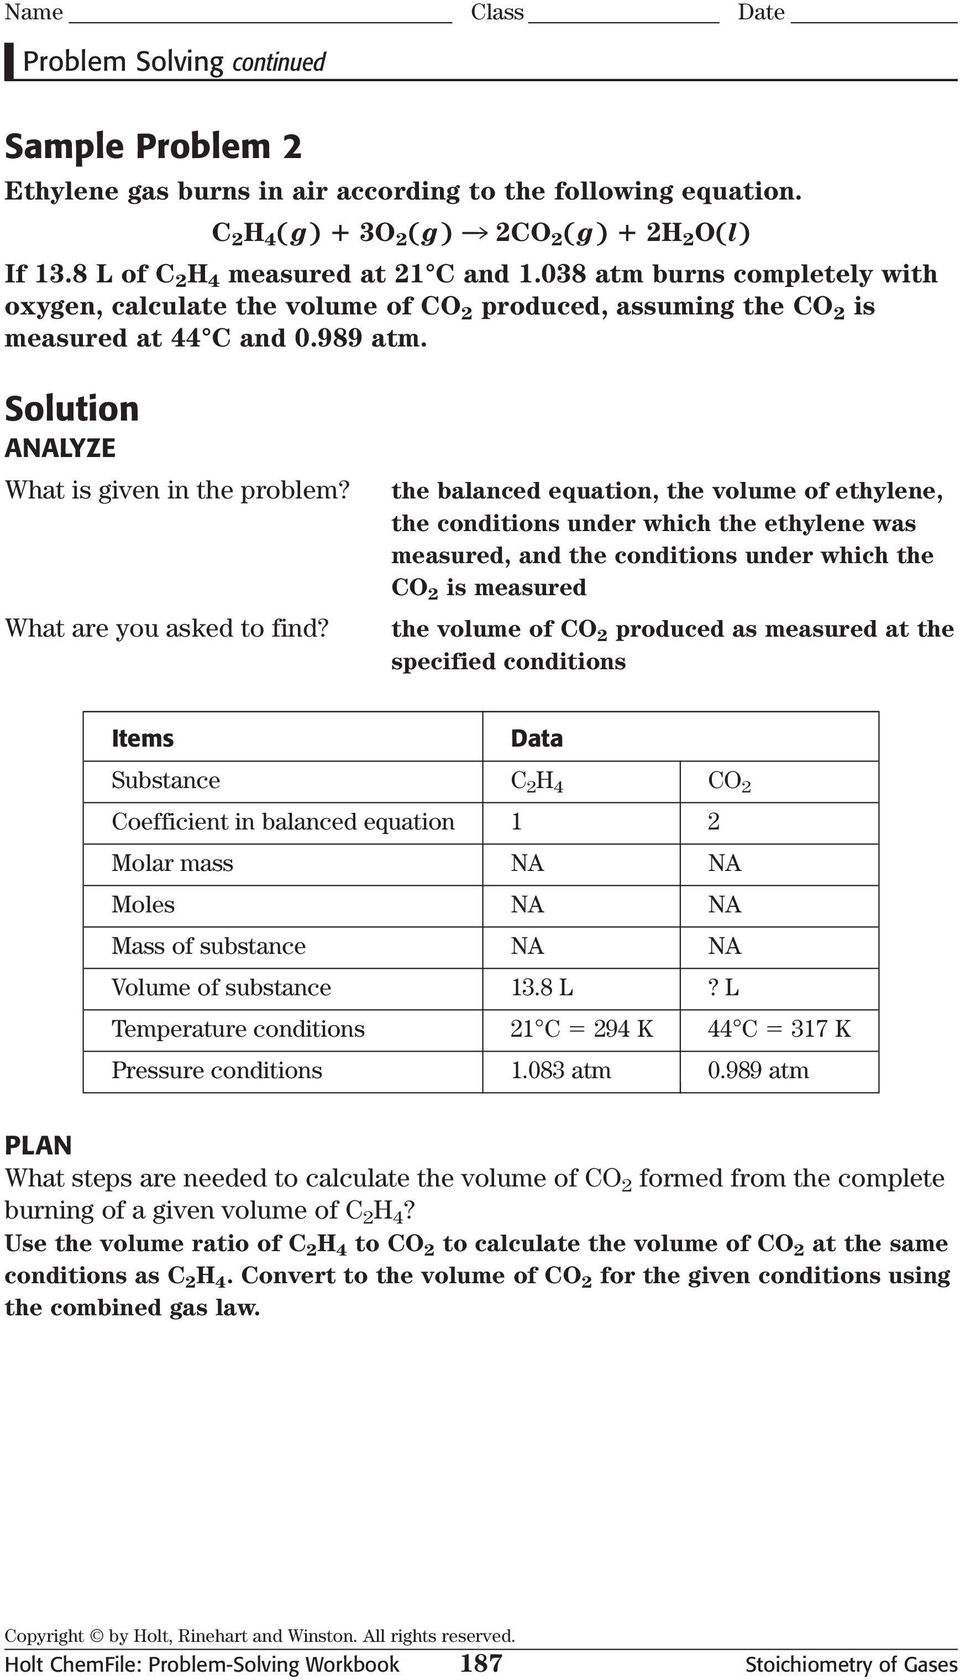 the balanced equation, the volume of ethylene, the conditions under which the ethylene was measured, and the conditions under which the CO is measured the volume of CO produced as measured at the